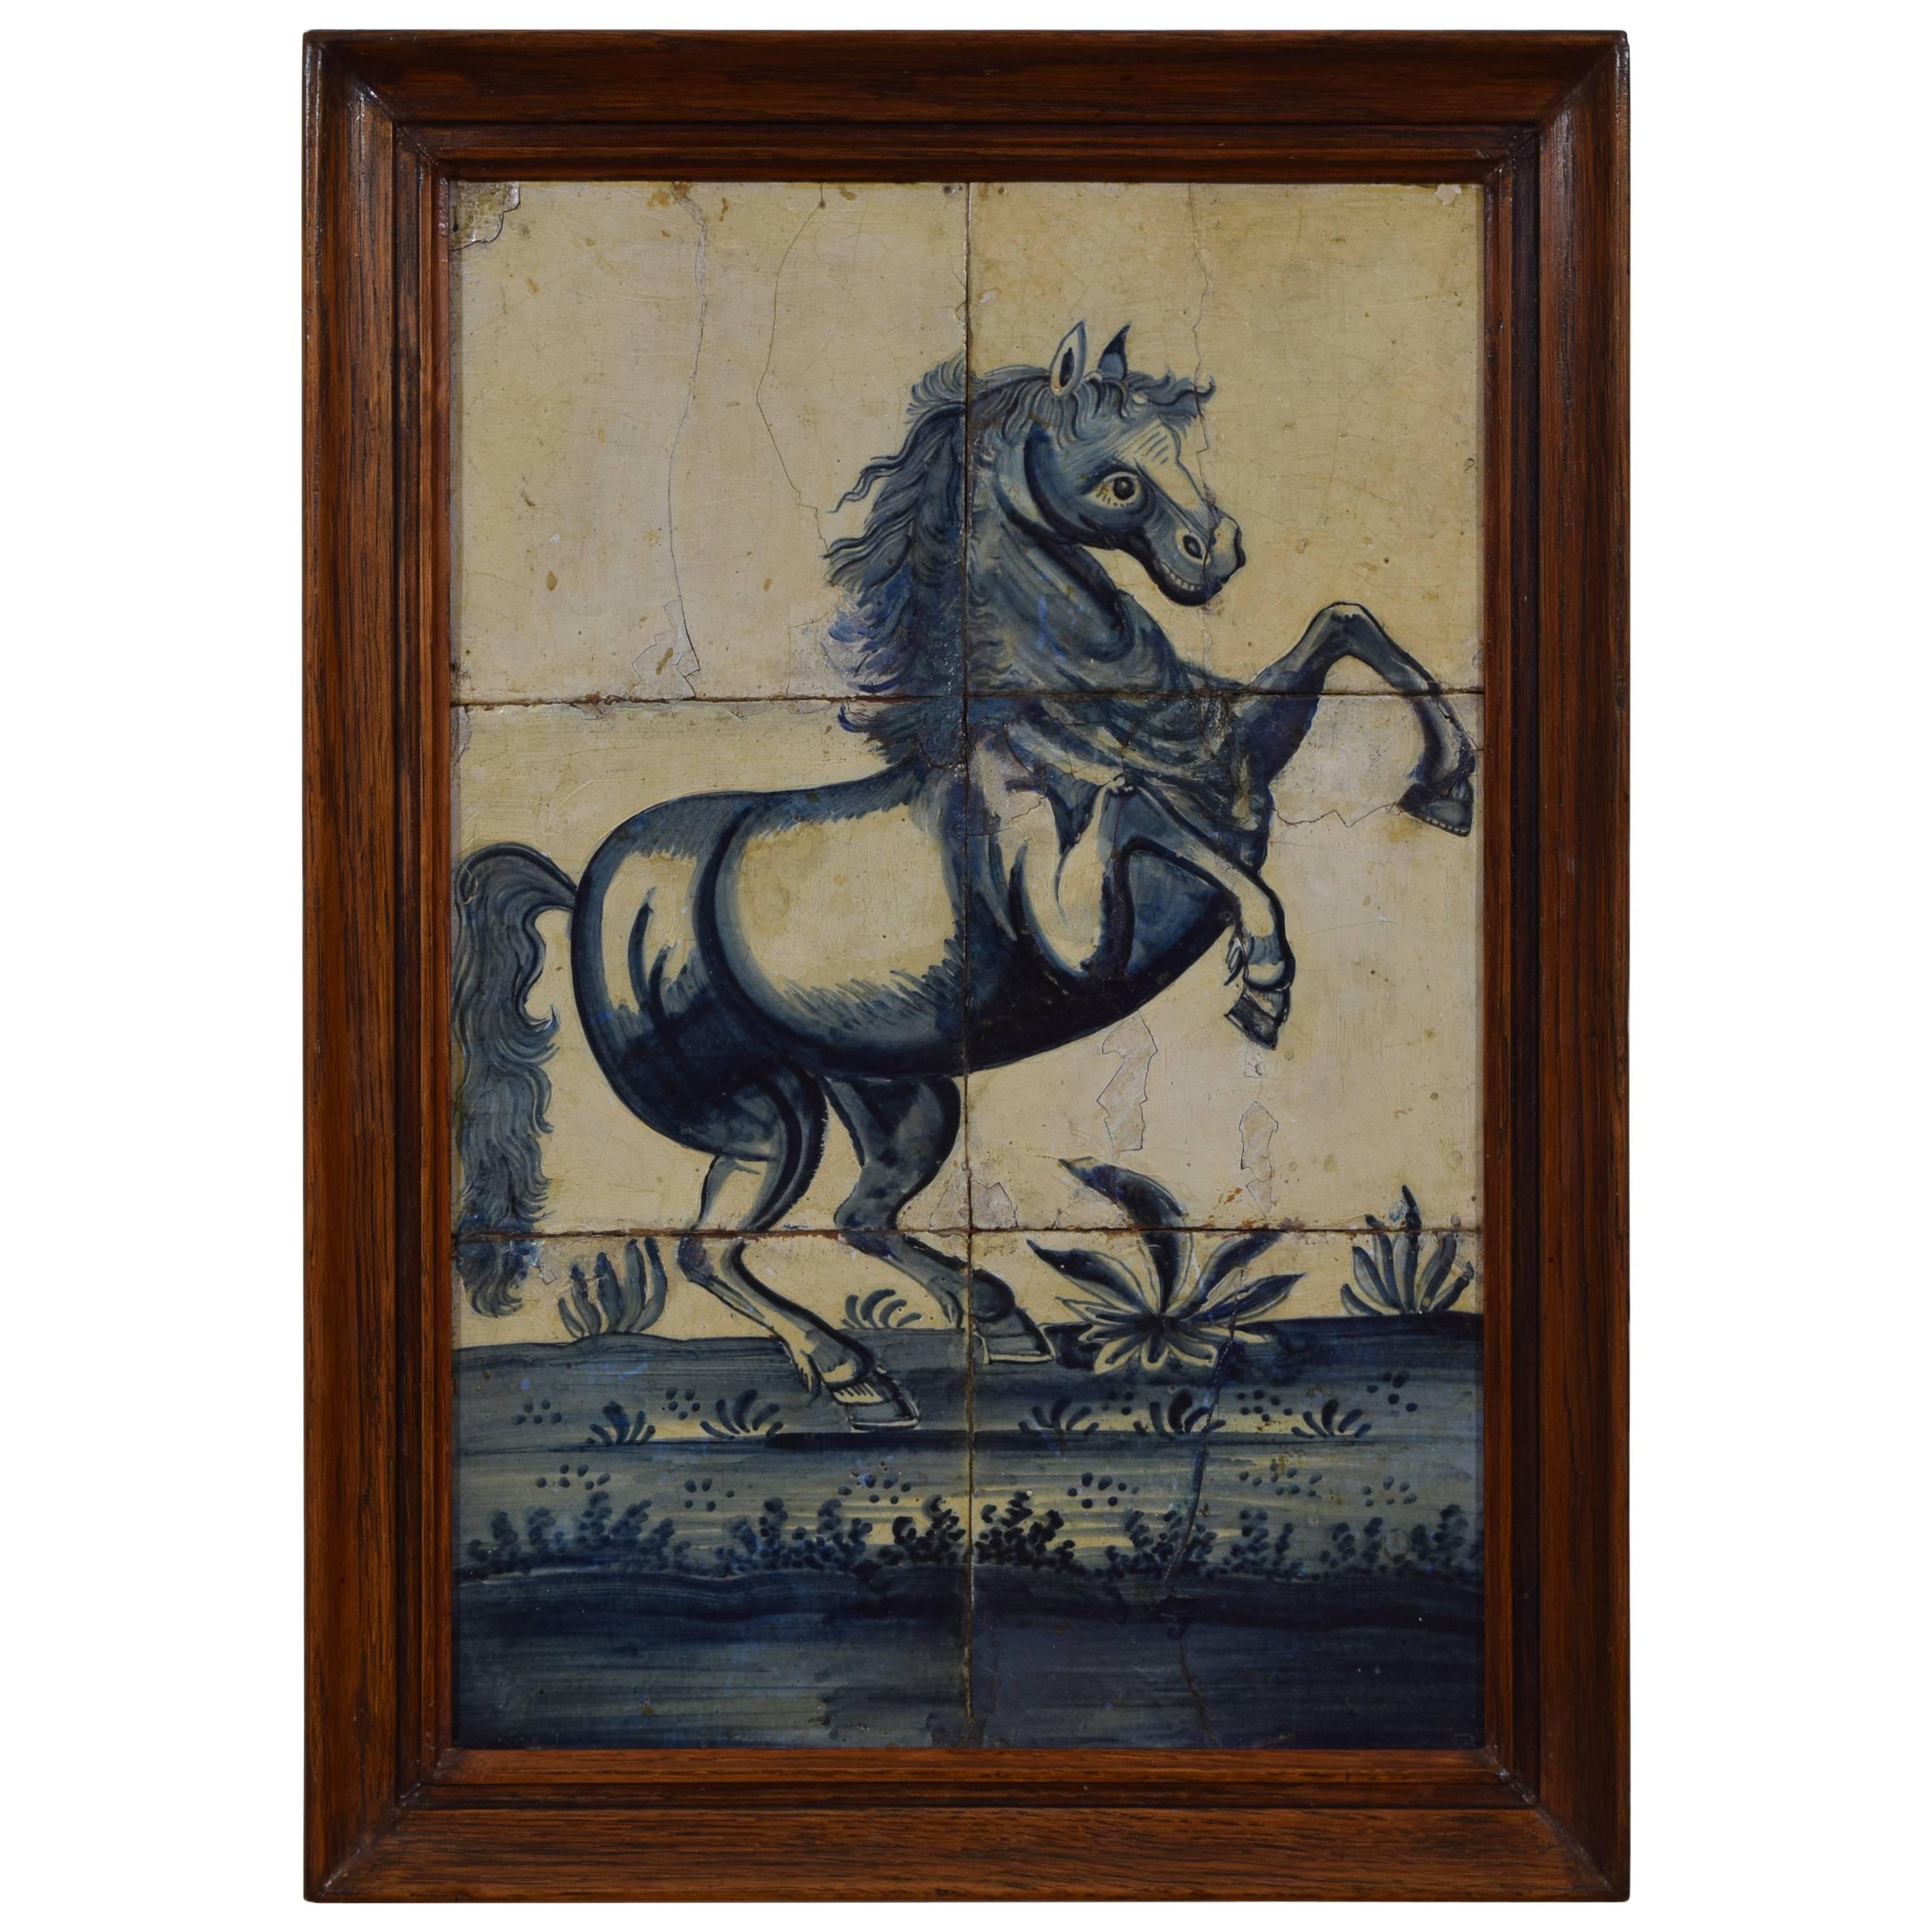 Portuguese Framed Painted Tiles of a Rearing Horse, 18th Century, Later Frame